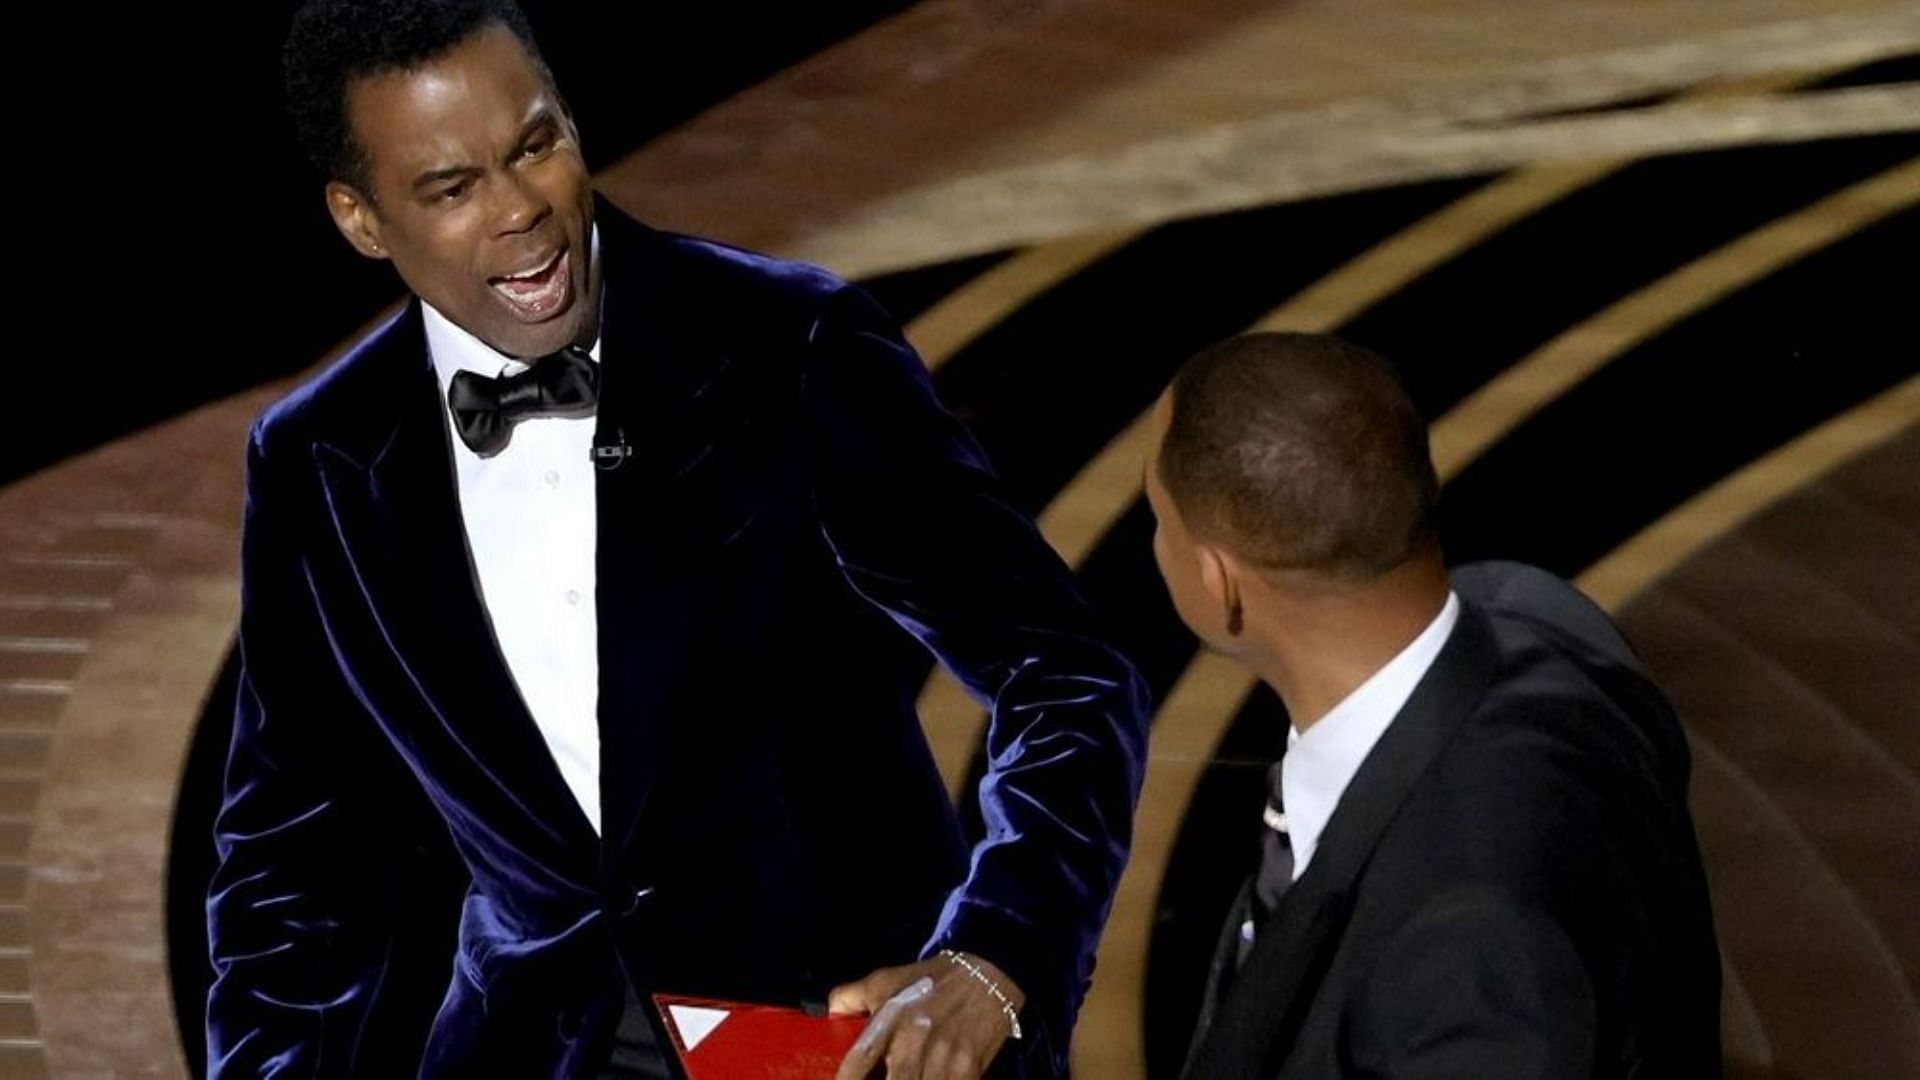 Brawl between Chris Rock and Will Smith on stage during Oscars reported to be unplanned (Image via AP)